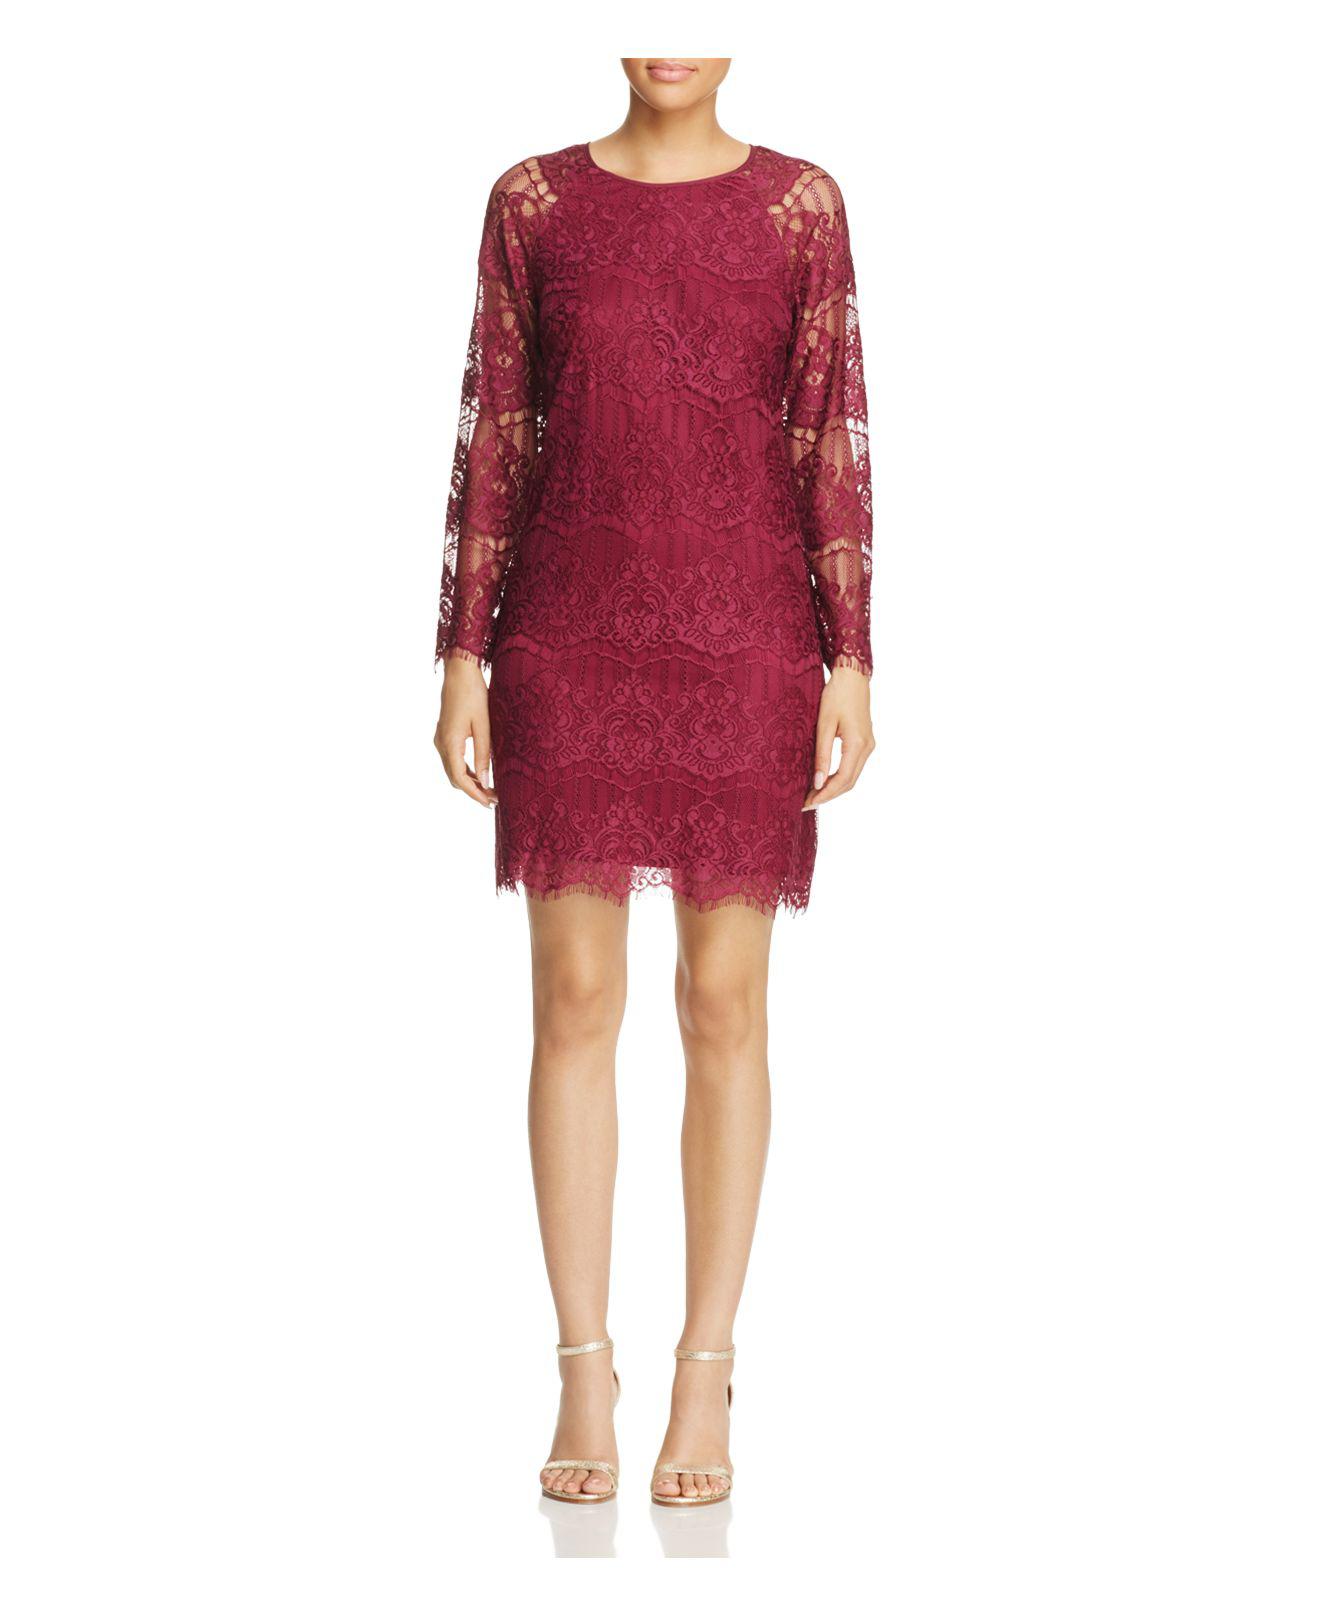 Lyst - Adrianna Papell Scalloped Lace Dress in Red